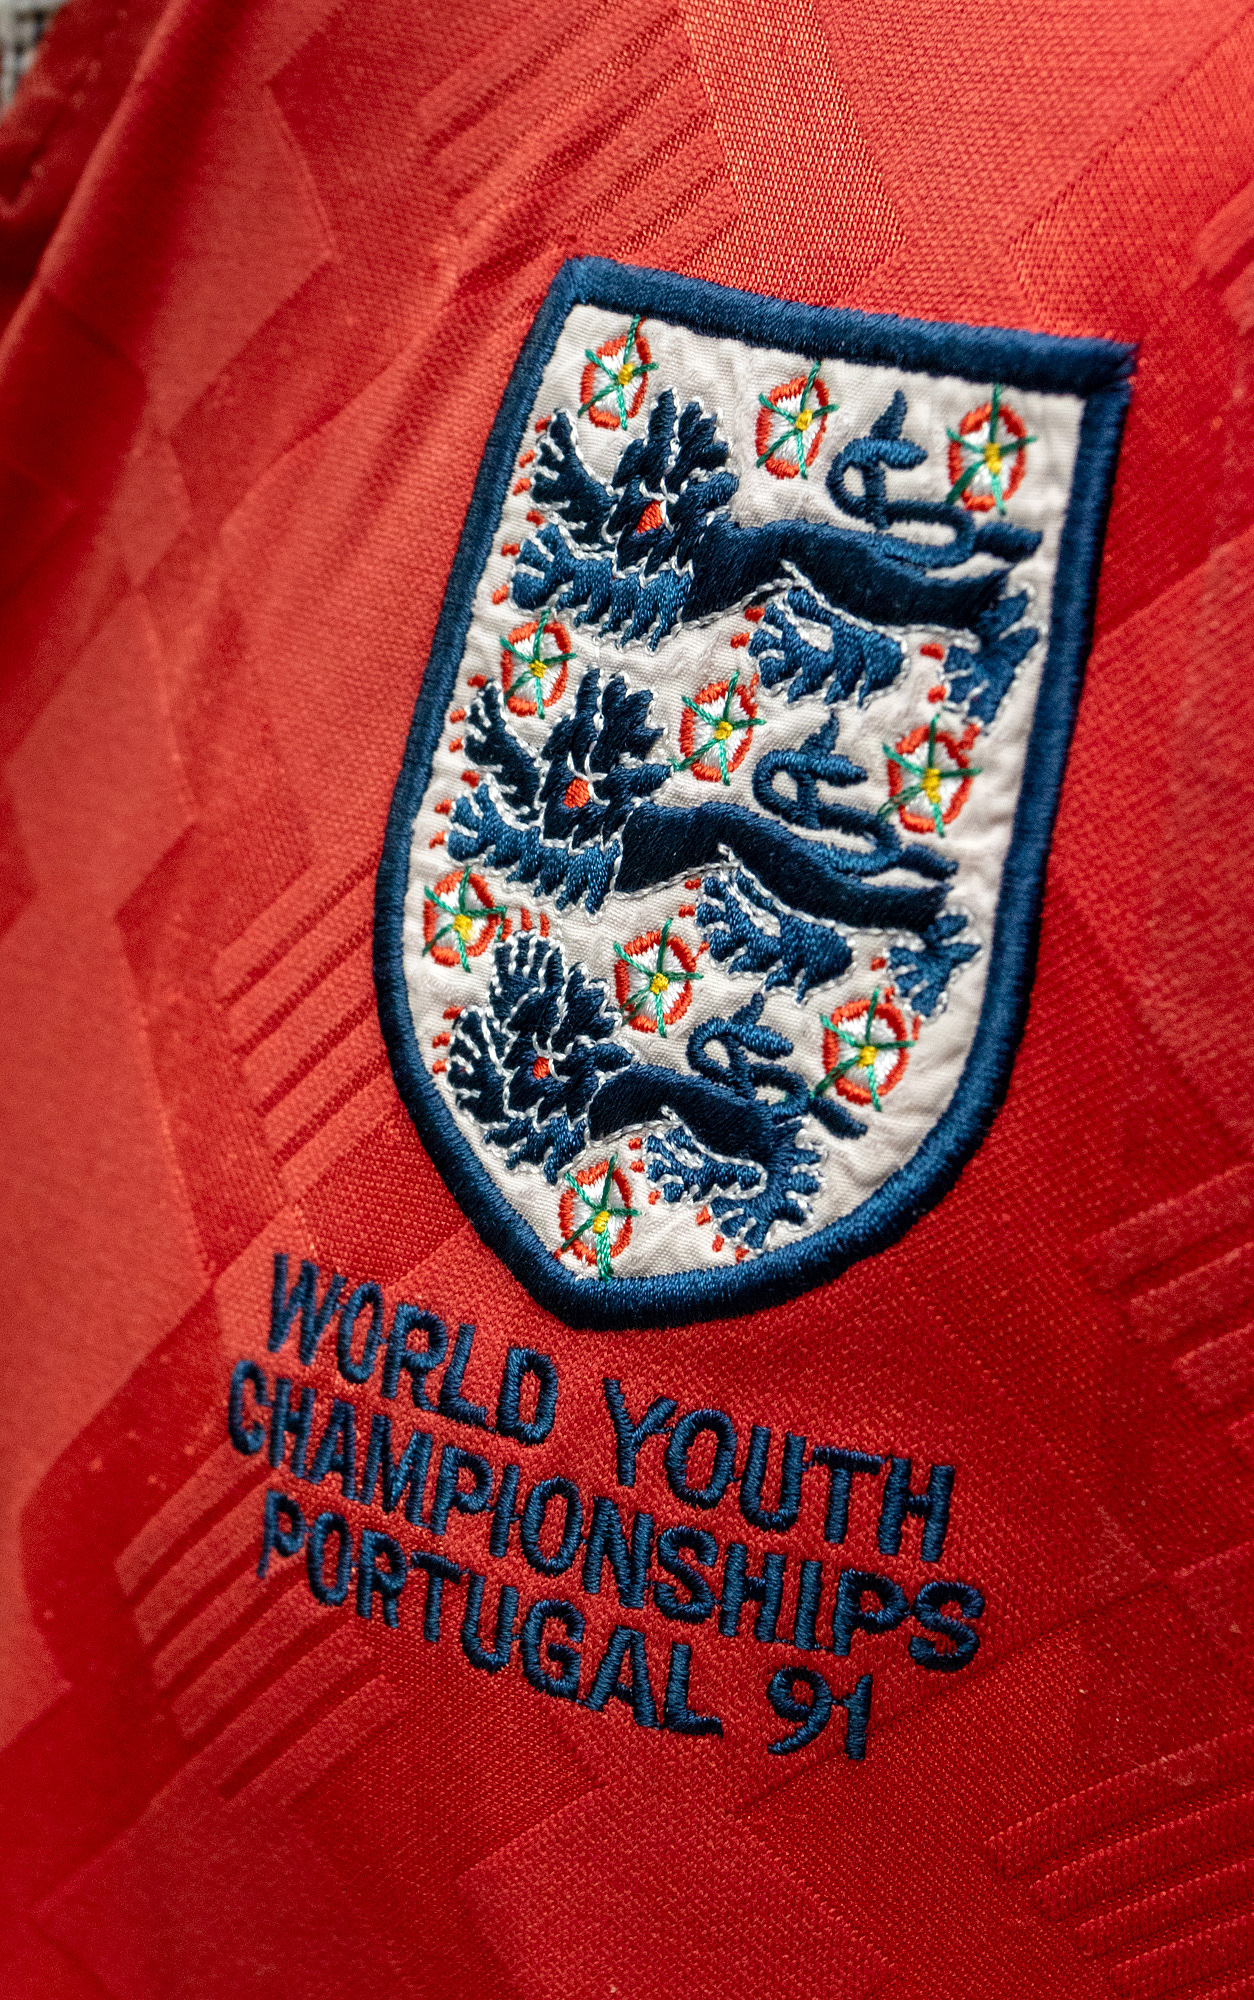 England: An England, World Youth Championships Portugal 1991, possibly match-issued shirt, no number - Bild 3 aus 4